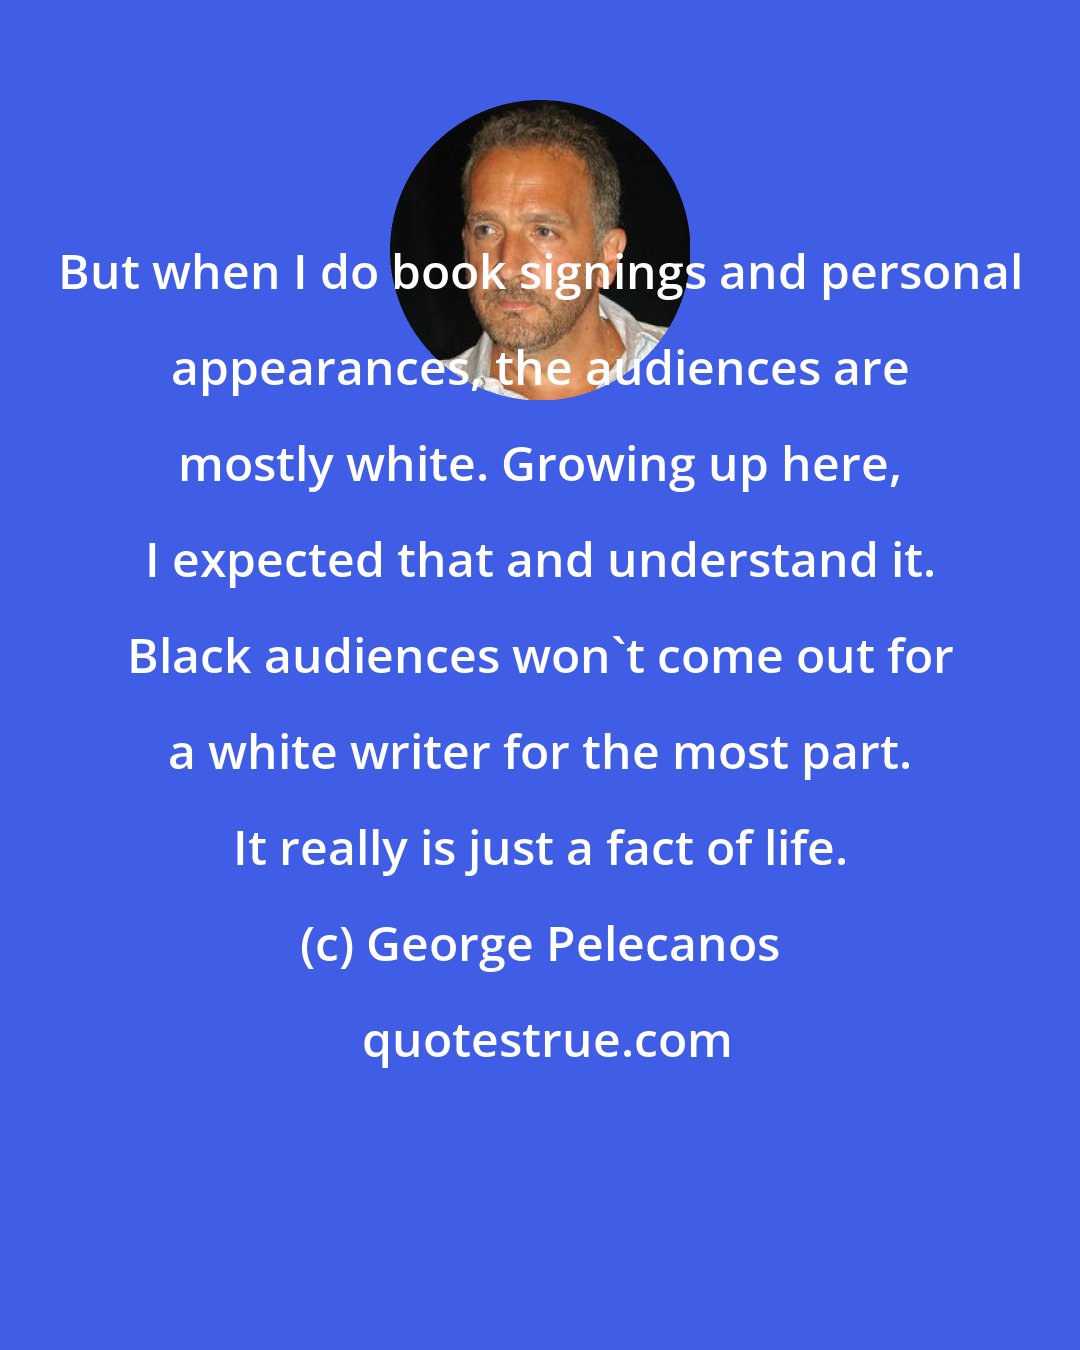 George Pelecanos: But when I do book signings and personal appearances, the audiences are mostly white. Growing up here, I expected that and understand it. Black audiences won't come out for a white writer for the most part. It really is just a fact of life.